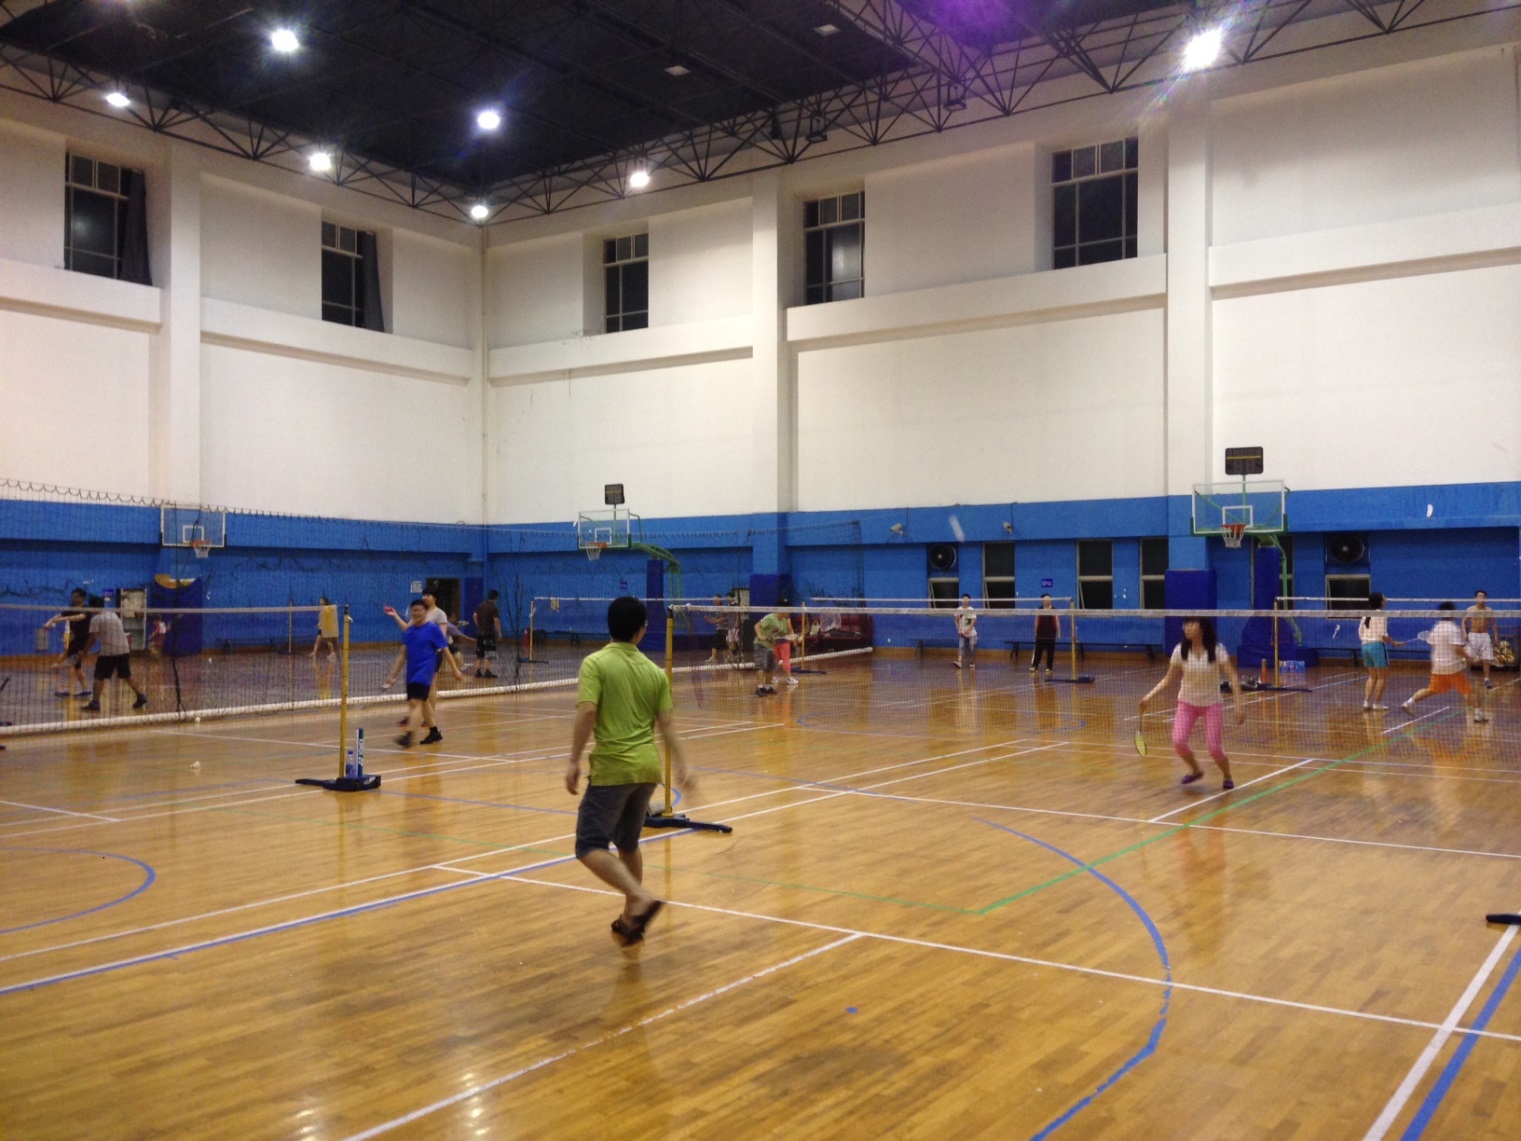 Badminton players in a gym.